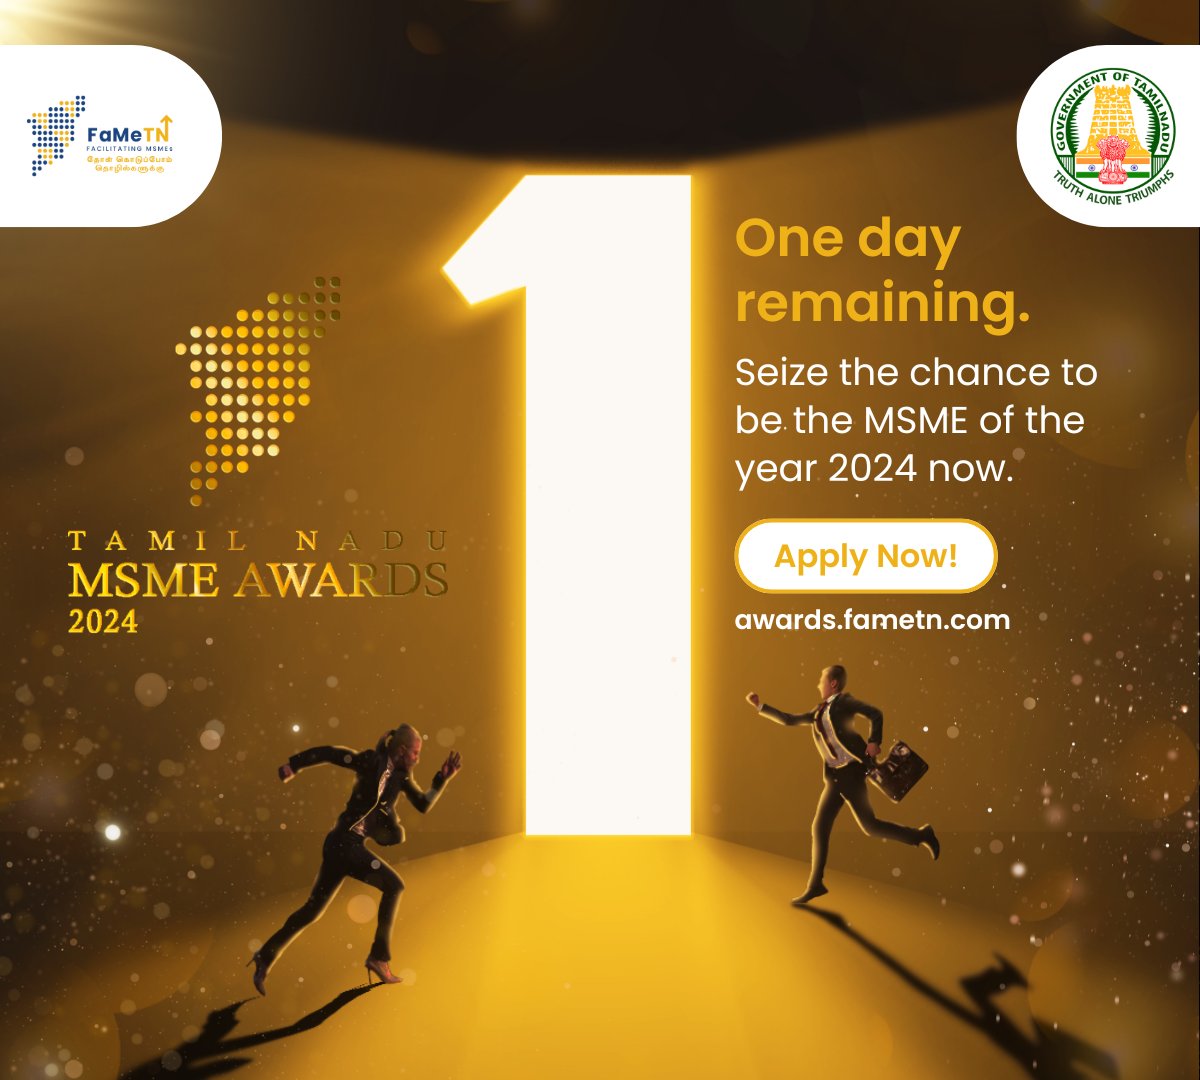 Hurry up MSMEs! The #registrationdeadline for #TamilNaduMSMEAward2024 closes on 20th May 2024 at 6:00 pm. You can still be the MSME of the year. Apply now and make your #mark. awards.fametn.com. Stay tuned to FaMeTN, your facilitating friend, for more updates. @minmsme